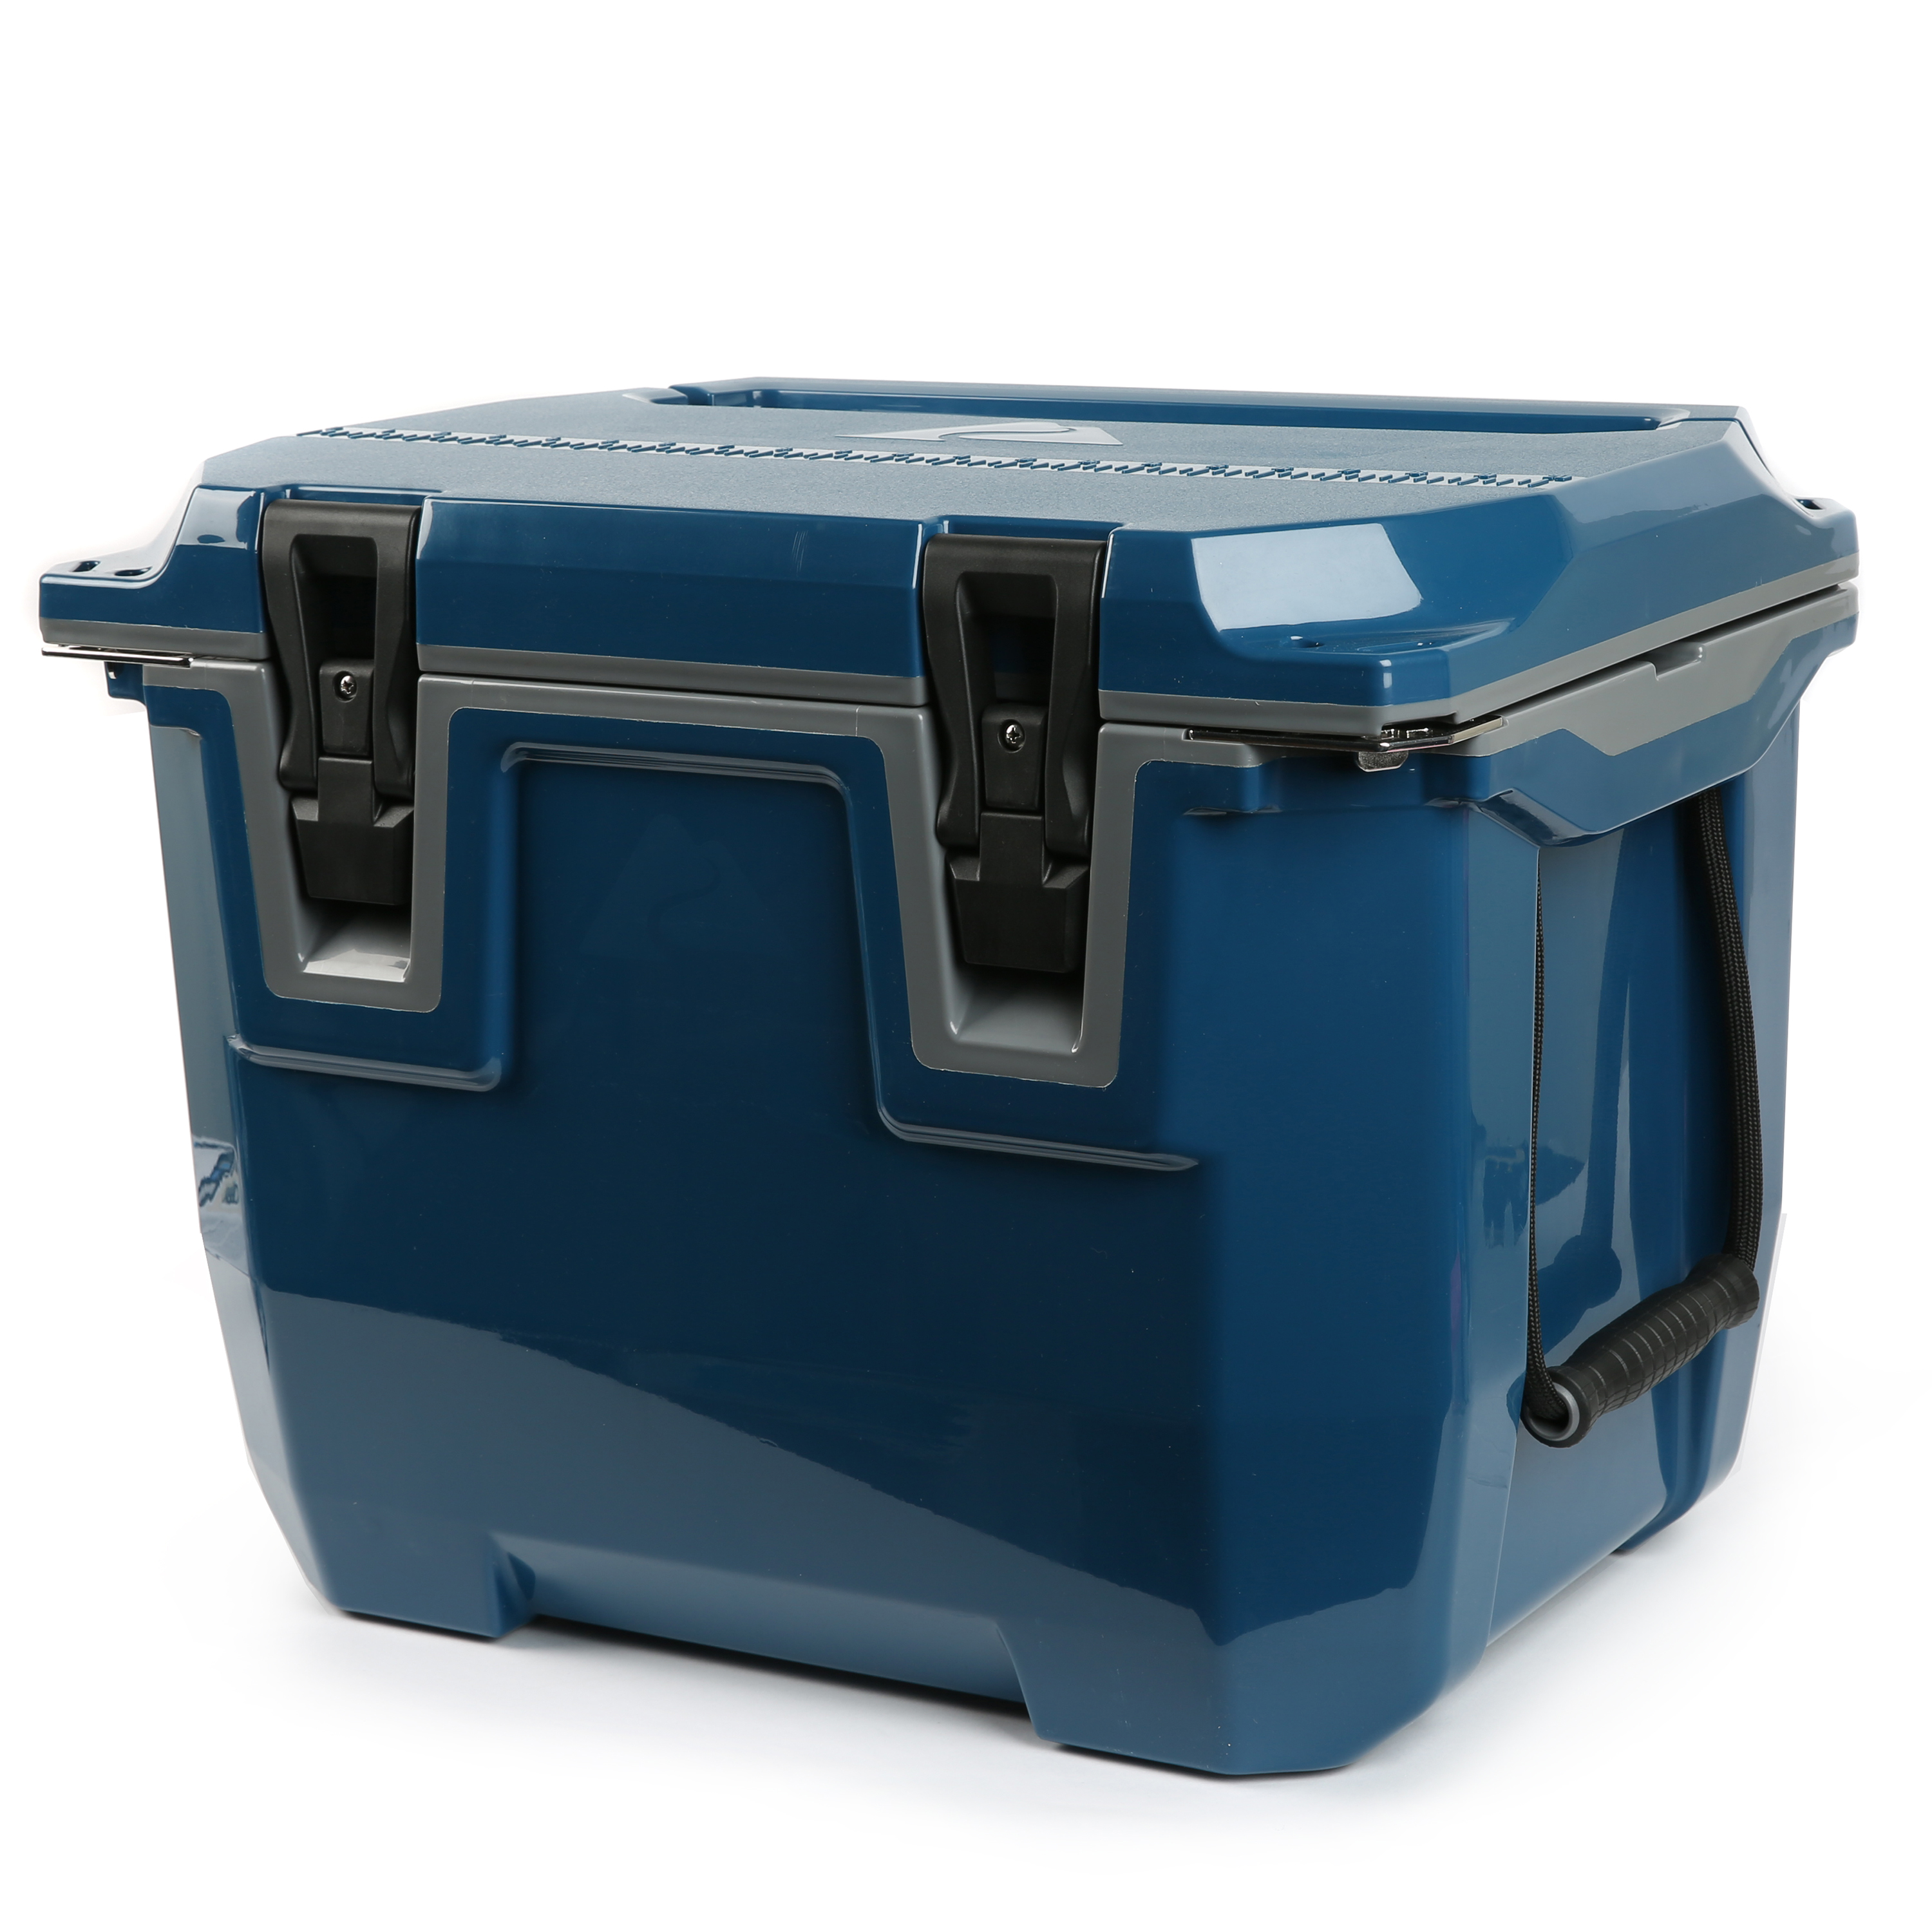 Ozark Trail 35 Quart Hard Sided Cooler with Microban Protection, Stainless Steel Locking Plate, Blue - image 2 of 14